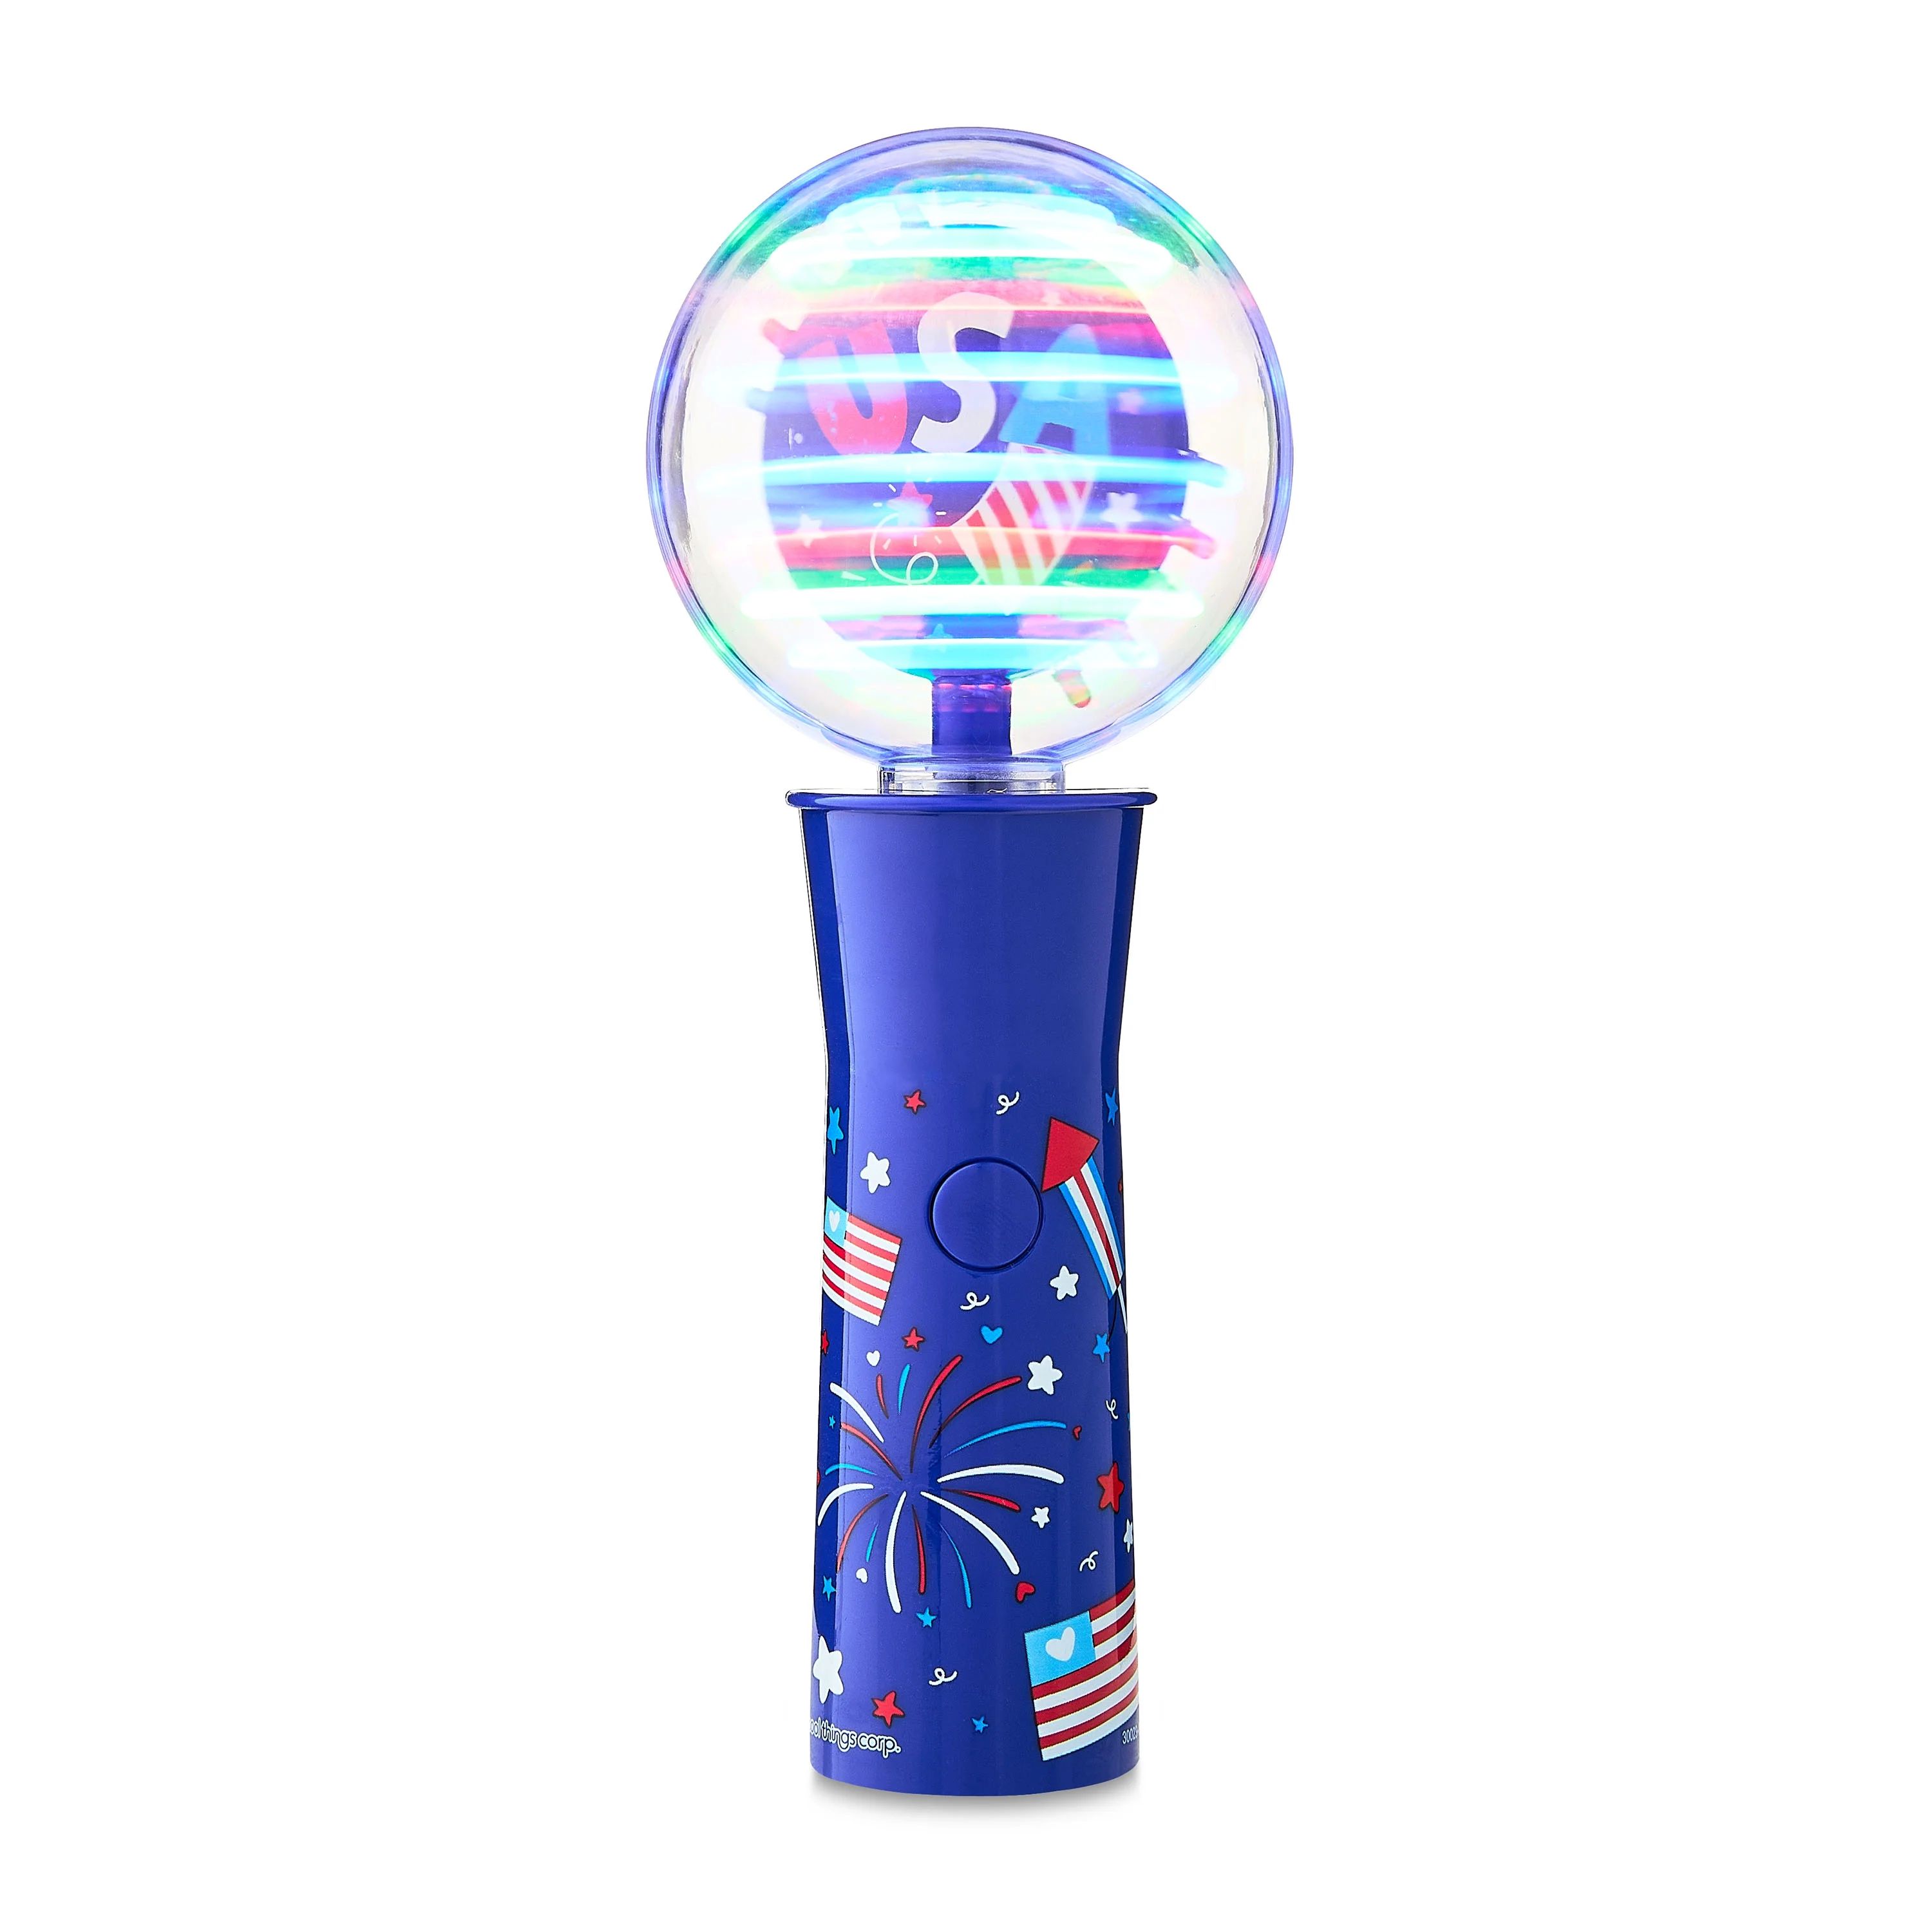 Patriotic Blue Plastic Jumbo Light-up Spinner Toy by Way To Celebrate | Walmart (US)